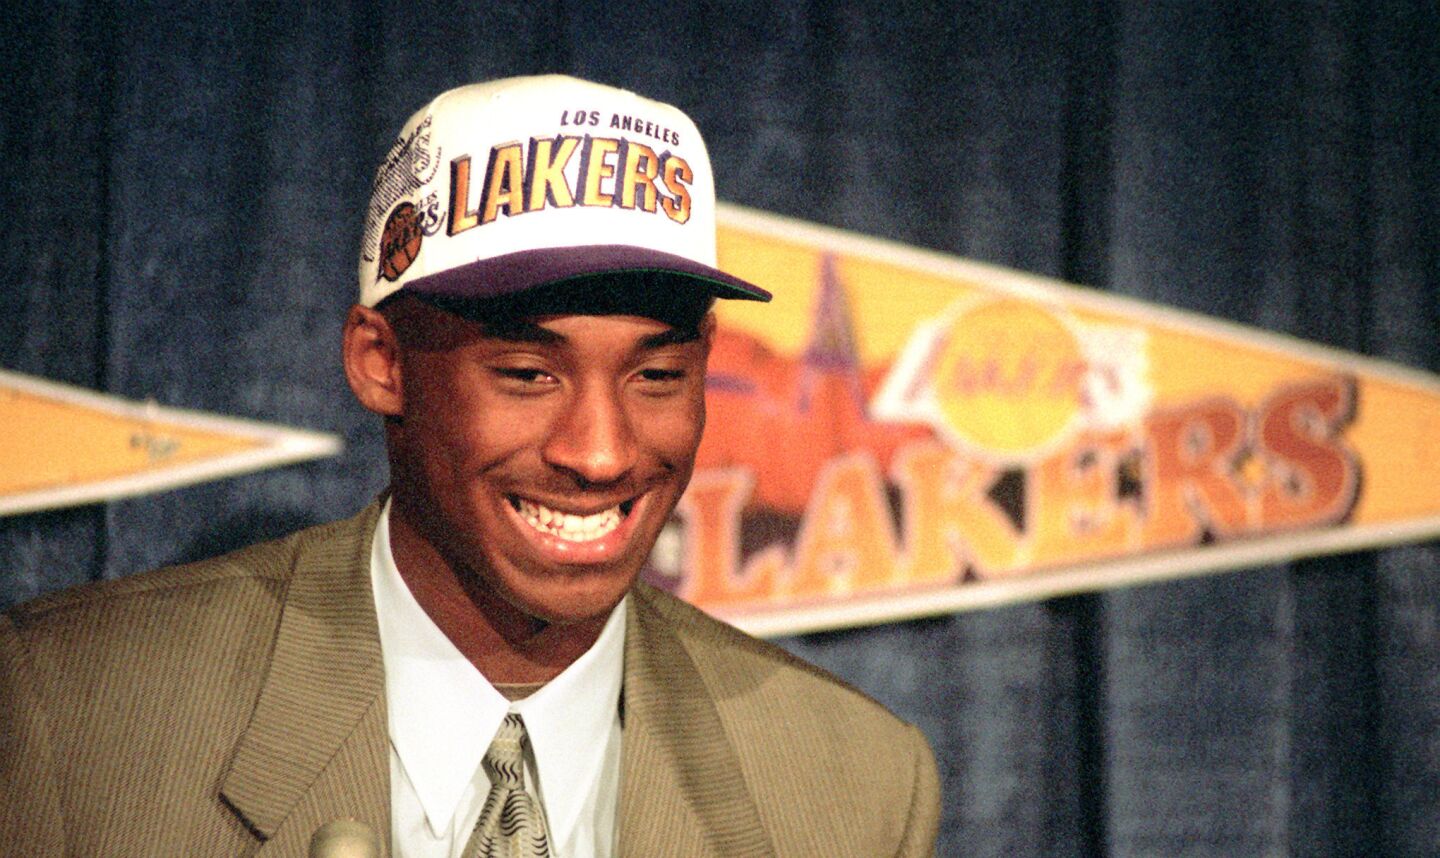 Kobe Bryant is all smiles at the July 1996 news conference where he was introduced after the Lakers acquired him from the Charlotte Hornets in exchange for Vlade Divac. The Hornets had selected the 17-year-old right out of high school with the 13th overall choice in the 1996 NBA draft.